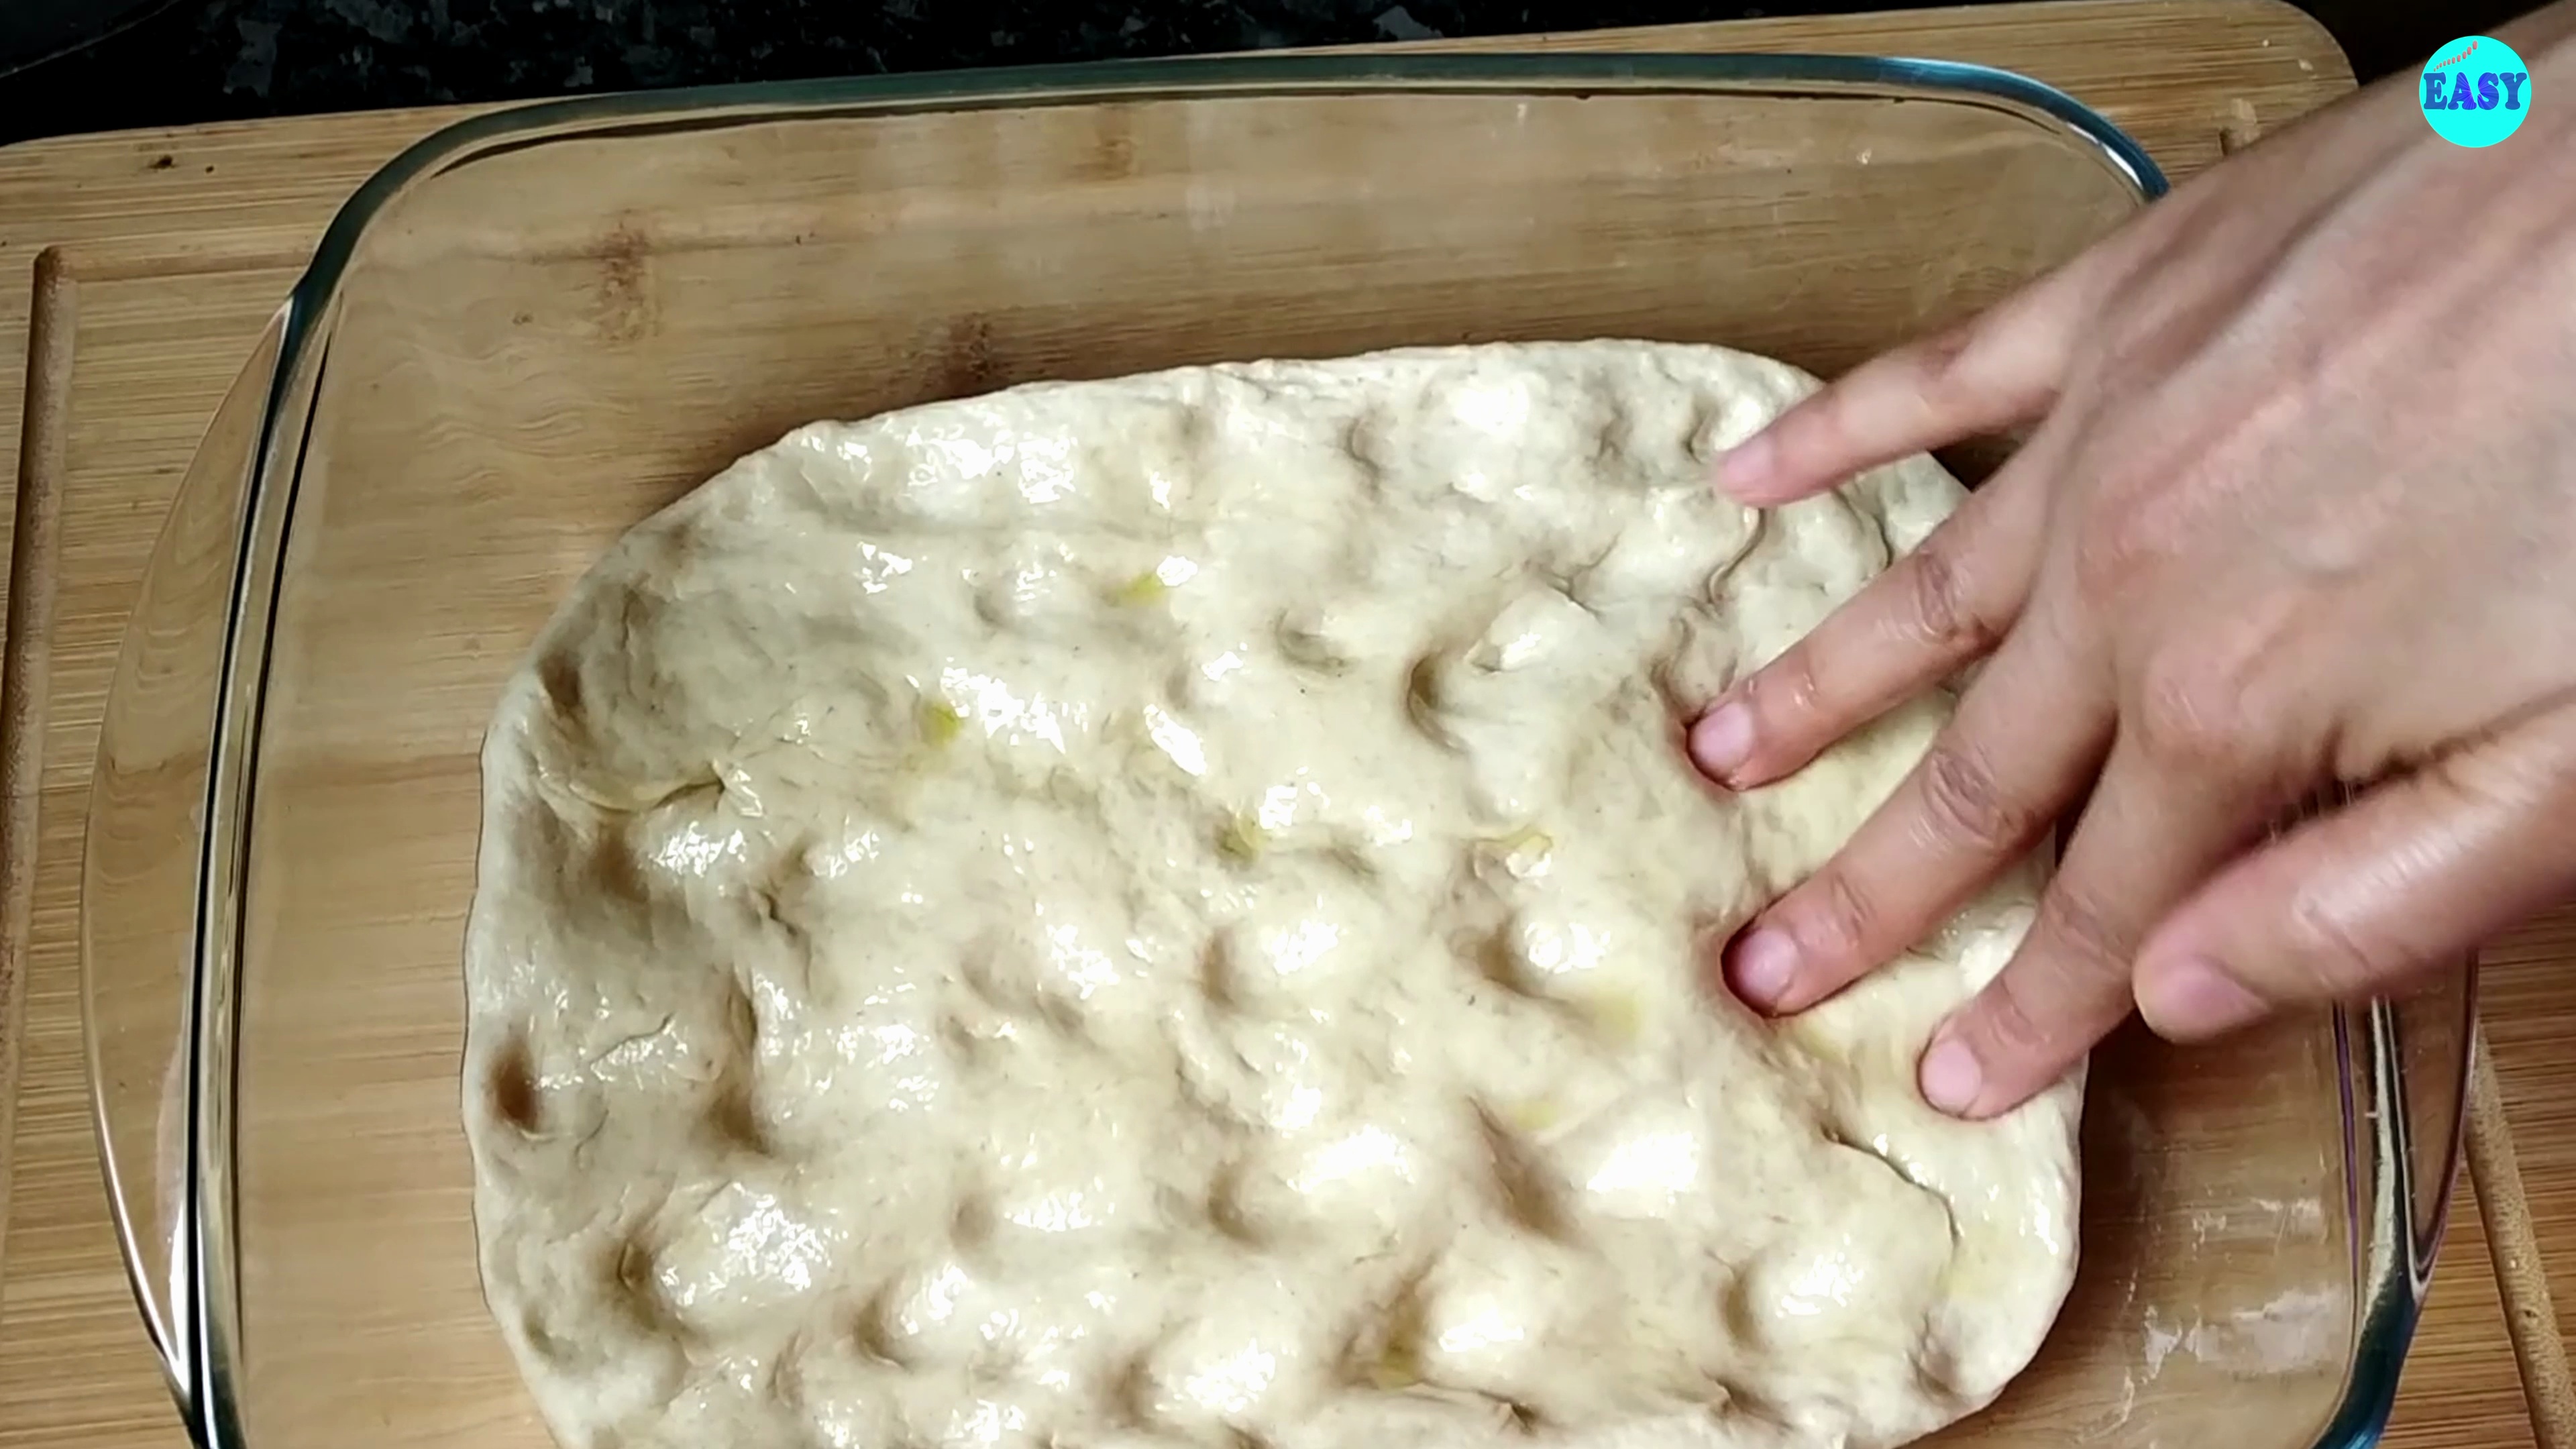 Step 6 - Punch down the dough and transfer it to a greased baking sheet. Use your fingers to press the dough into a flat, rectangular shape.